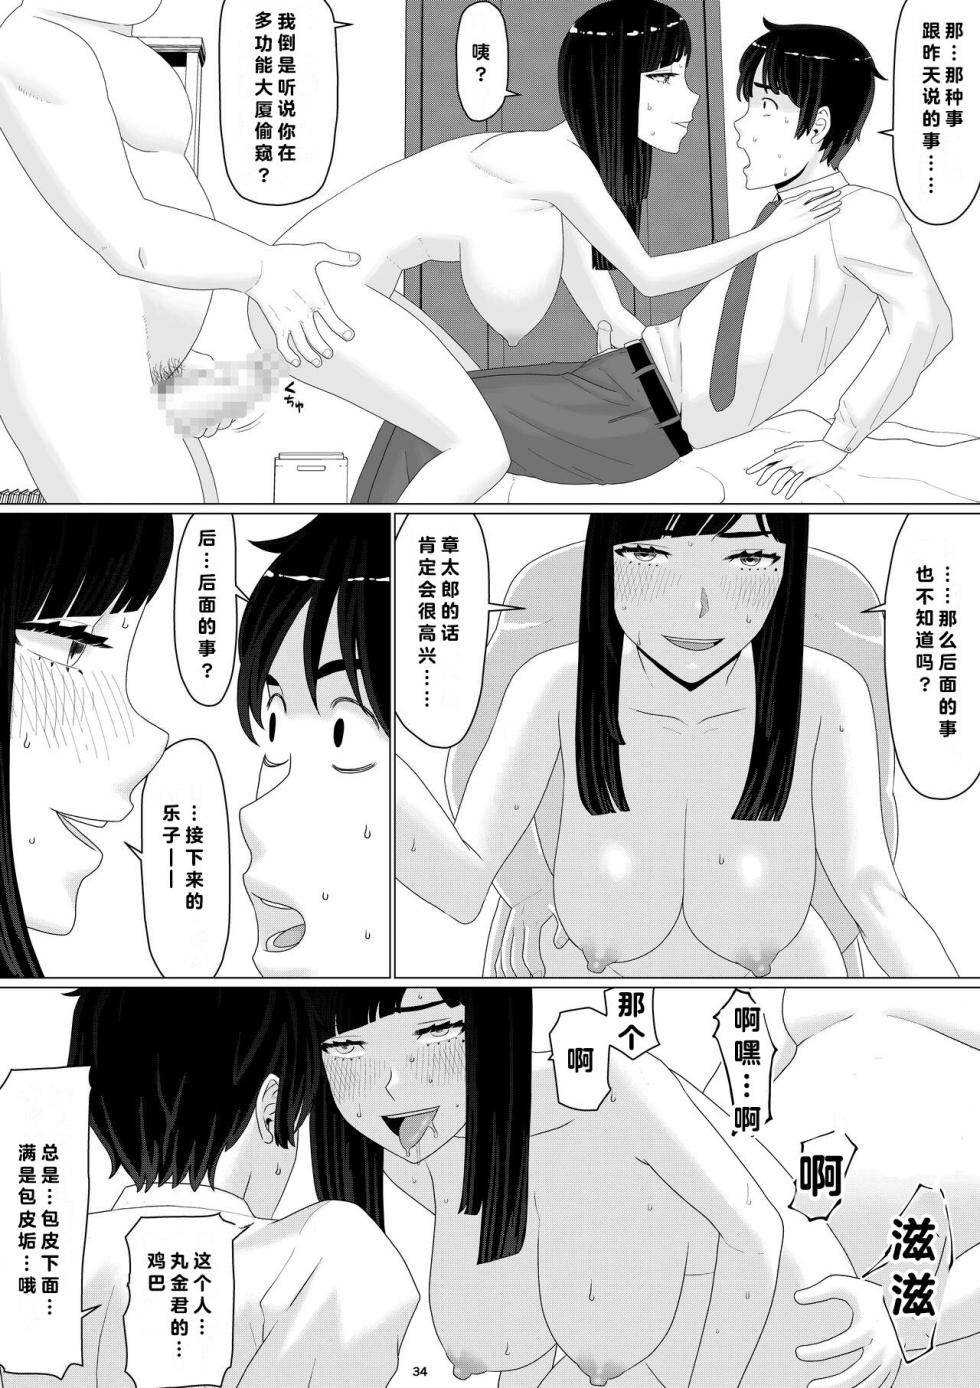 Chieri can't lose! 3 -Perverted toilet wife who fertilizes anyone's sperm with her husband's official approval- Volume 2 [Chinese] [超勇漢化組] - Page 35